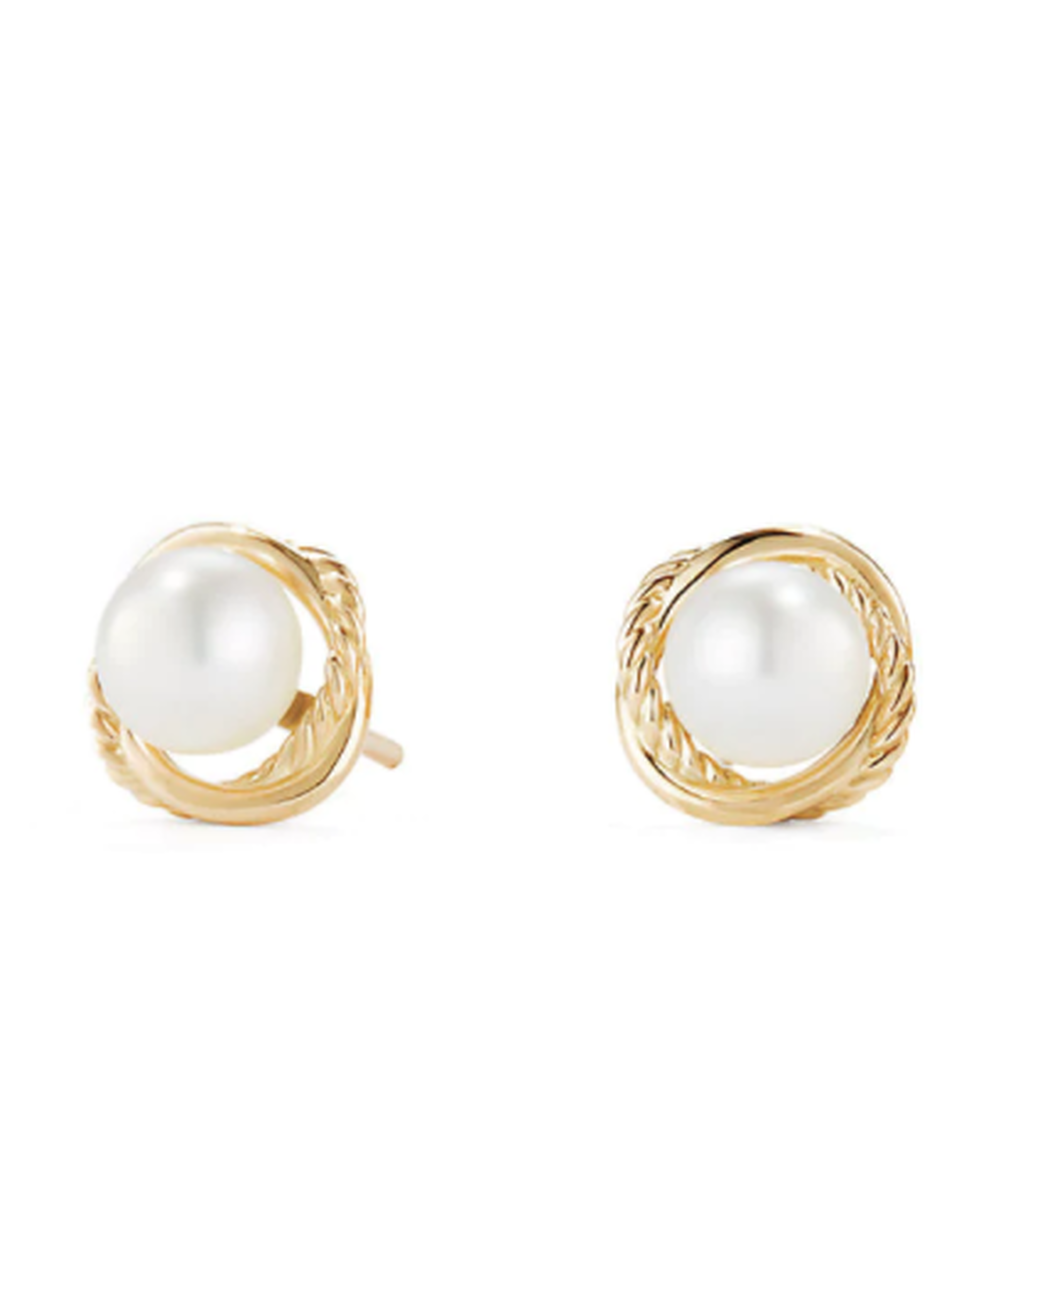 Our Favorite Wedding Earrings for Every Bride to Wear on Her Big Day ...